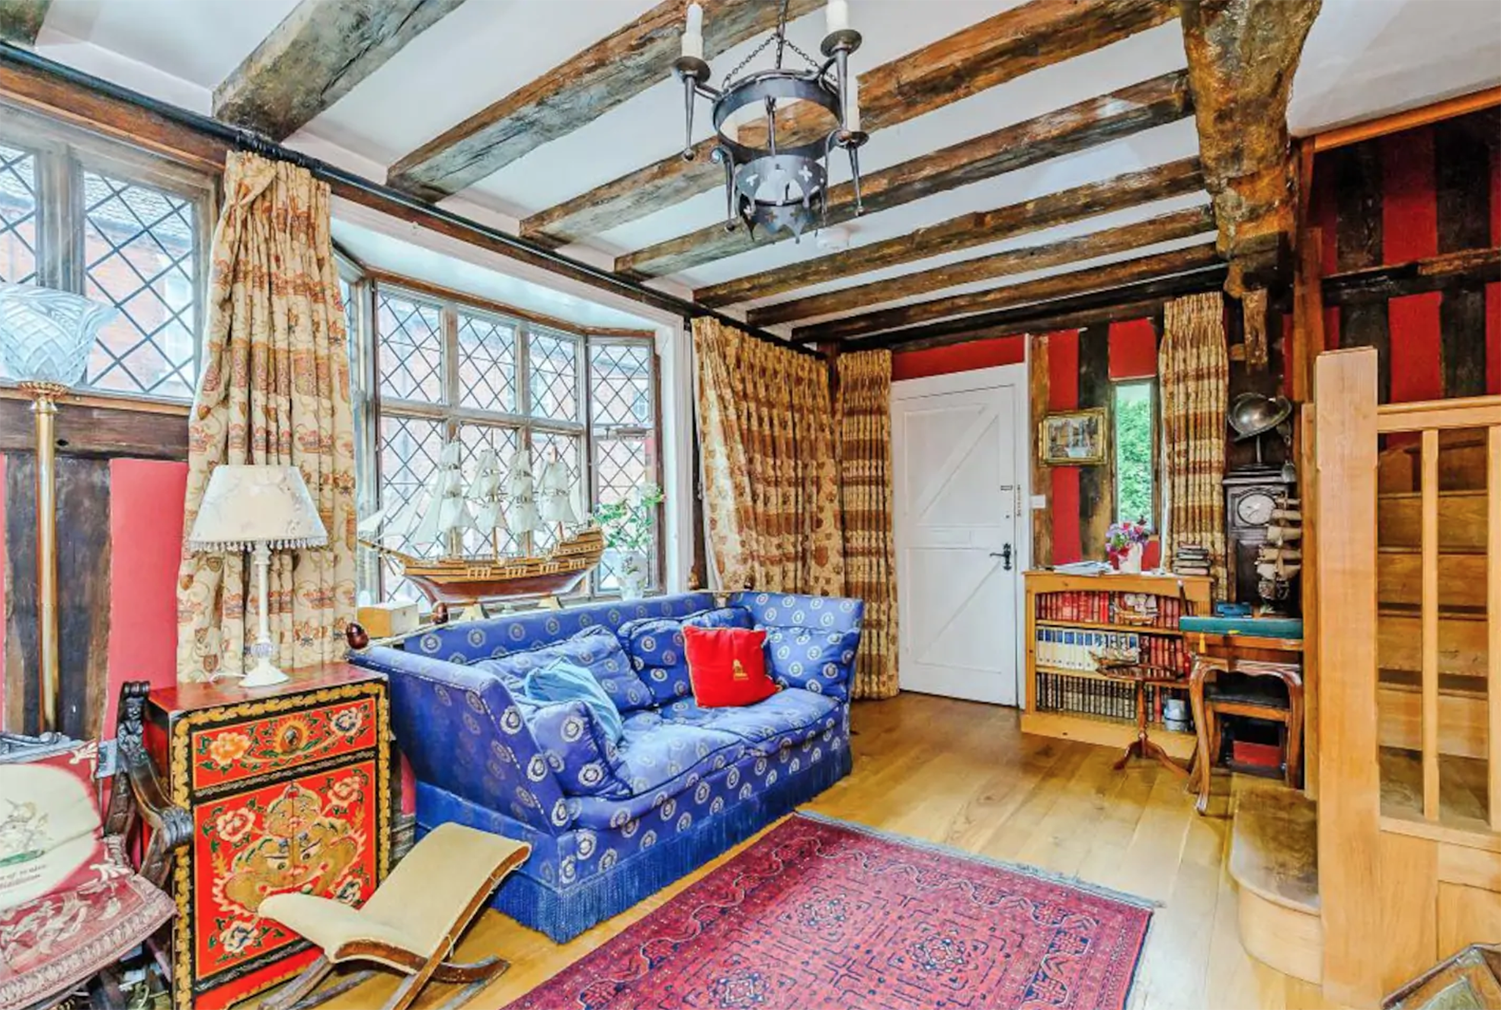 Harry Potter’s childhood home is now an Airbnb